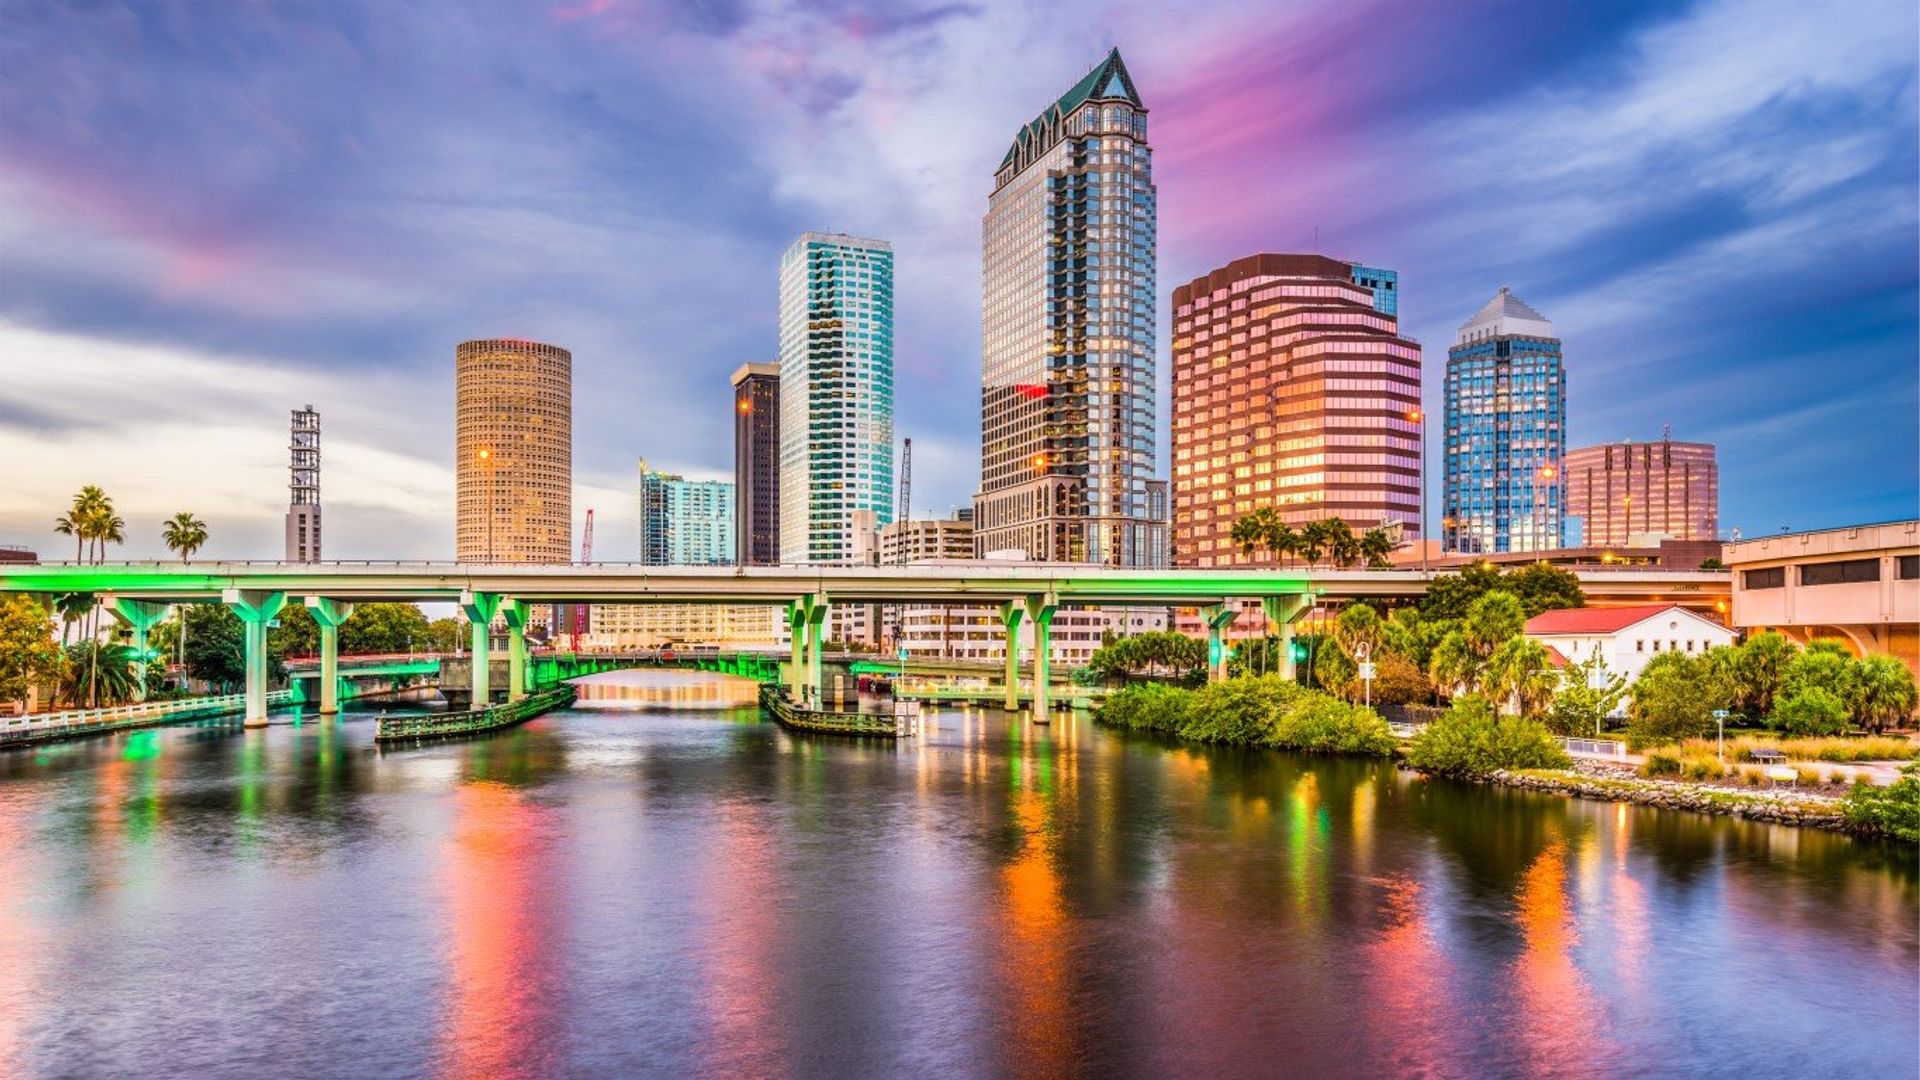 Tampa city on the west coast of Florida, is home to Busch Gardens, Adventure Island and the Florida Aquarium